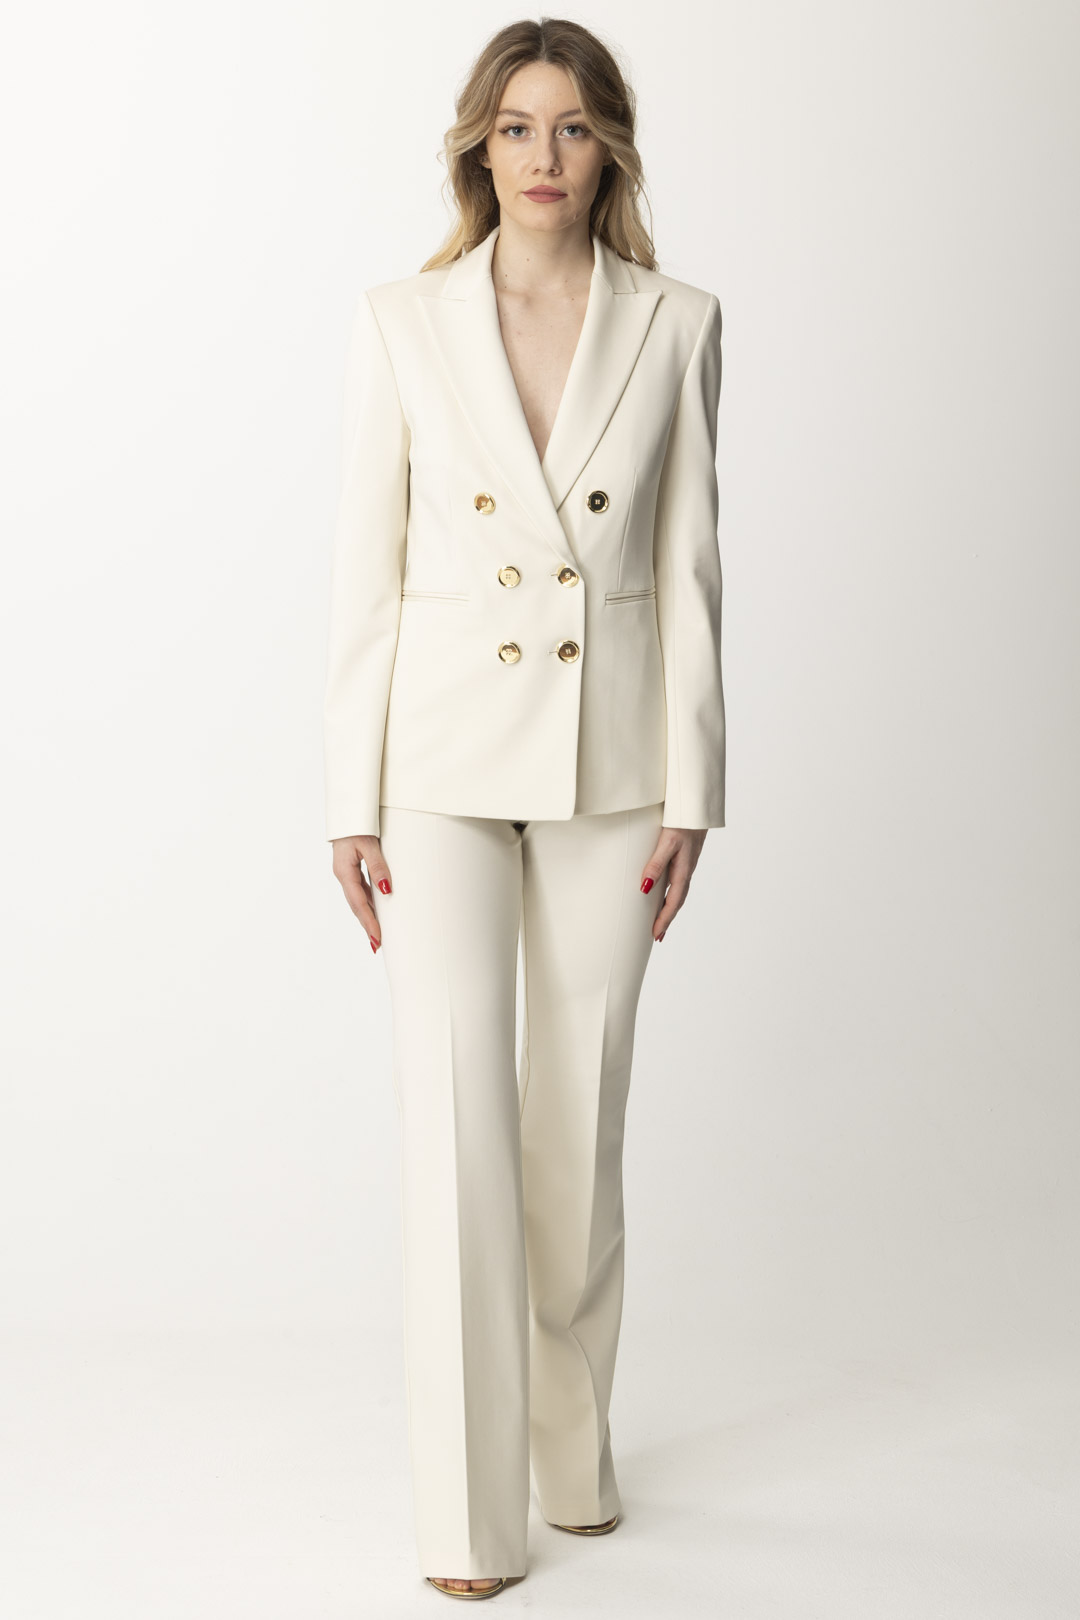 Preview: Pinko Jacket and trouser suit ROSA FUMO BIANCO